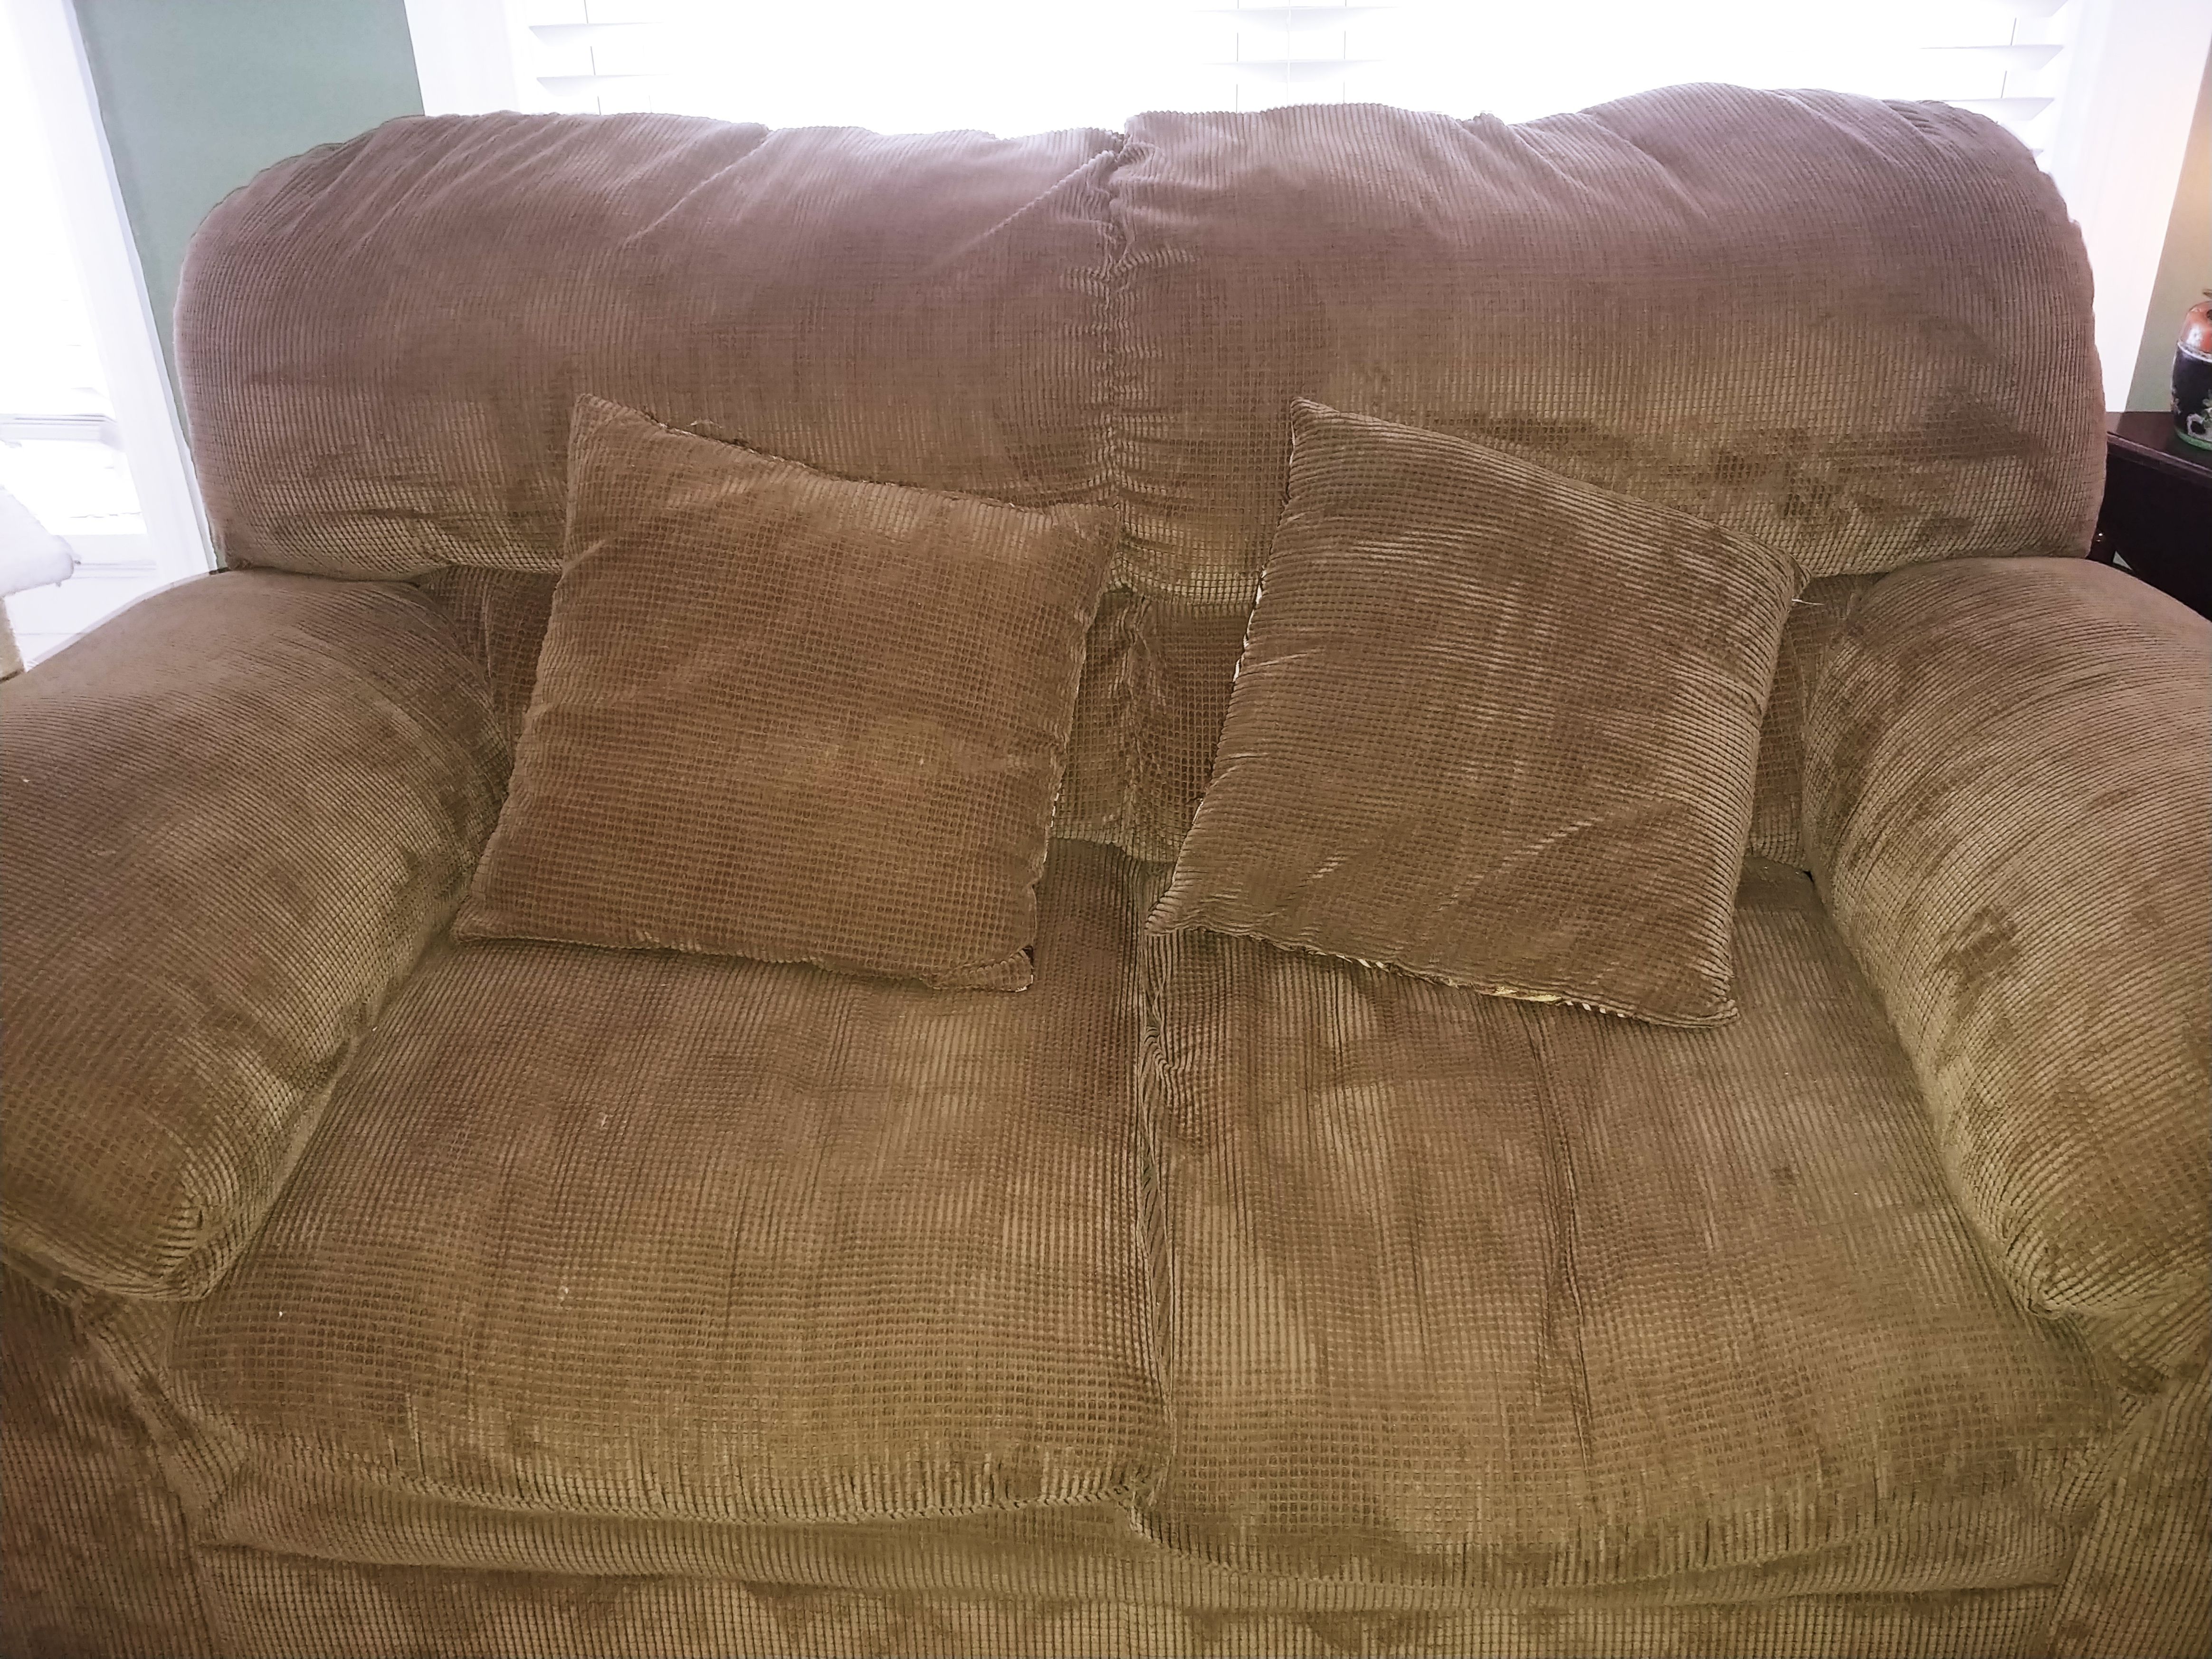 FREE 2 loveseats. Apartment perfect sizes.